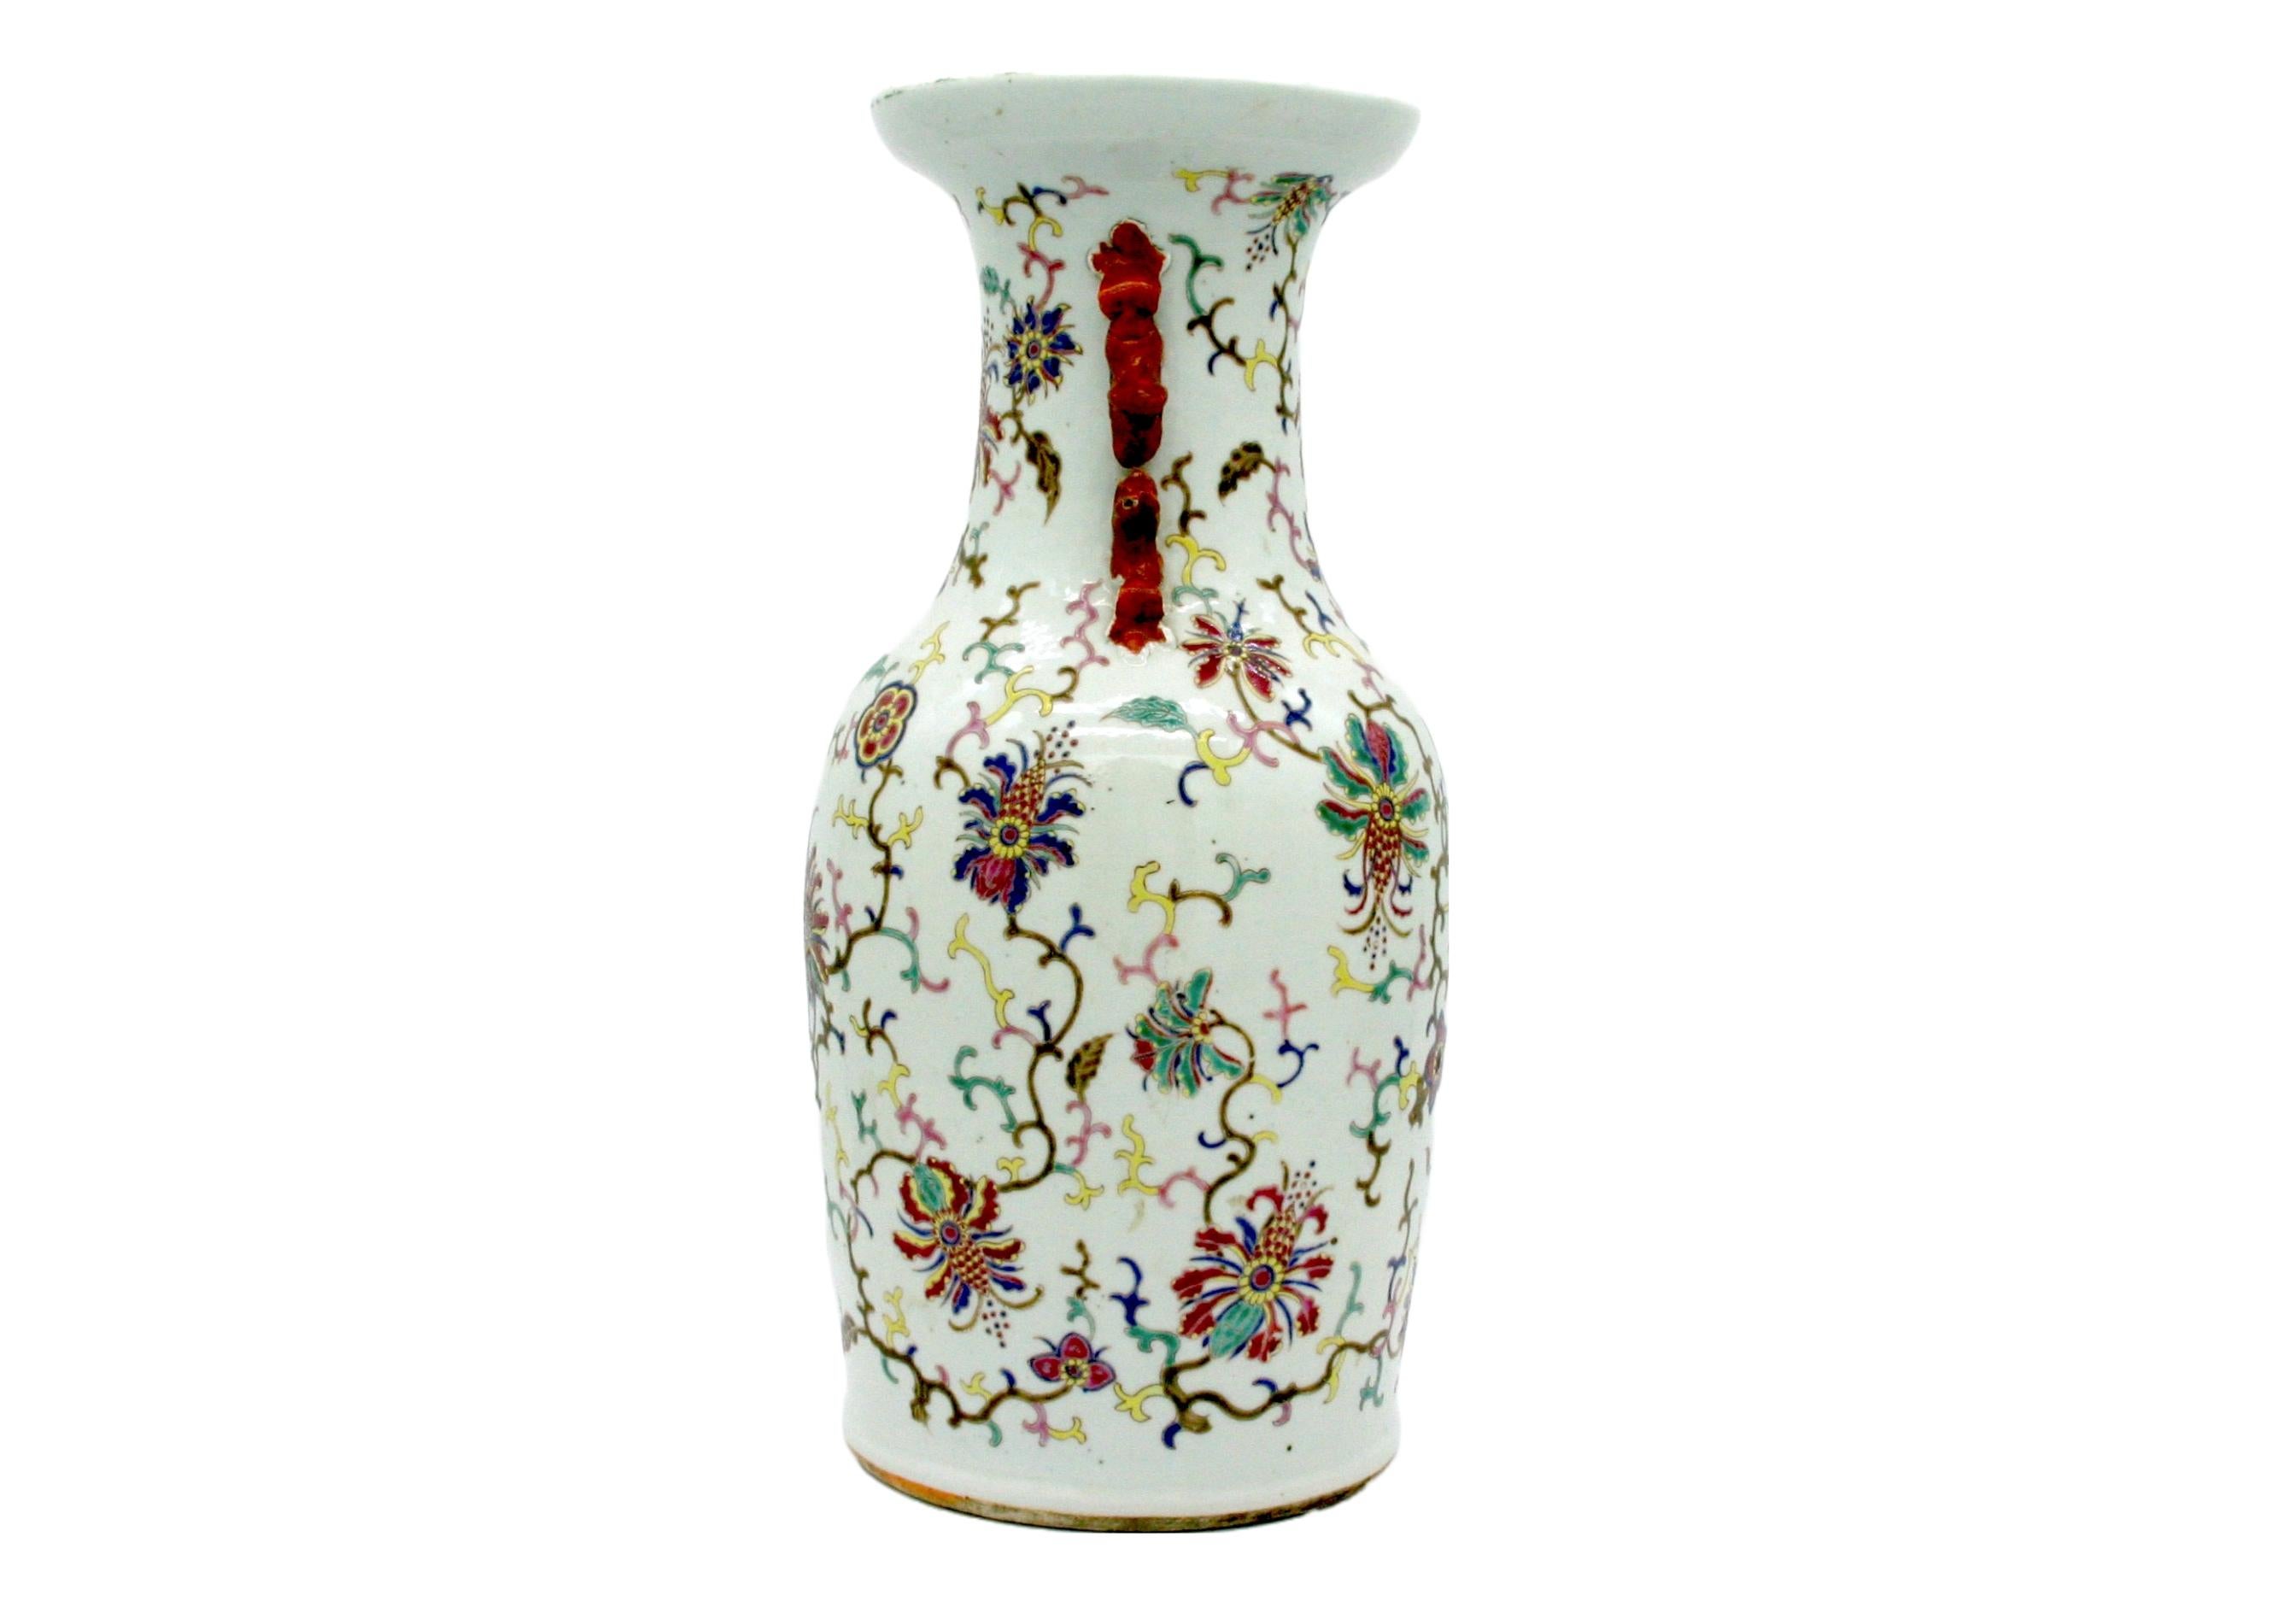 Late 19th century hand painted and crafted Chinese porcelain decorative urn / vase with exterior floral details and side handles. The vase is in great condition. Minor wear appropriate with age / use. The piece measures 17 inches tall X 8 inches